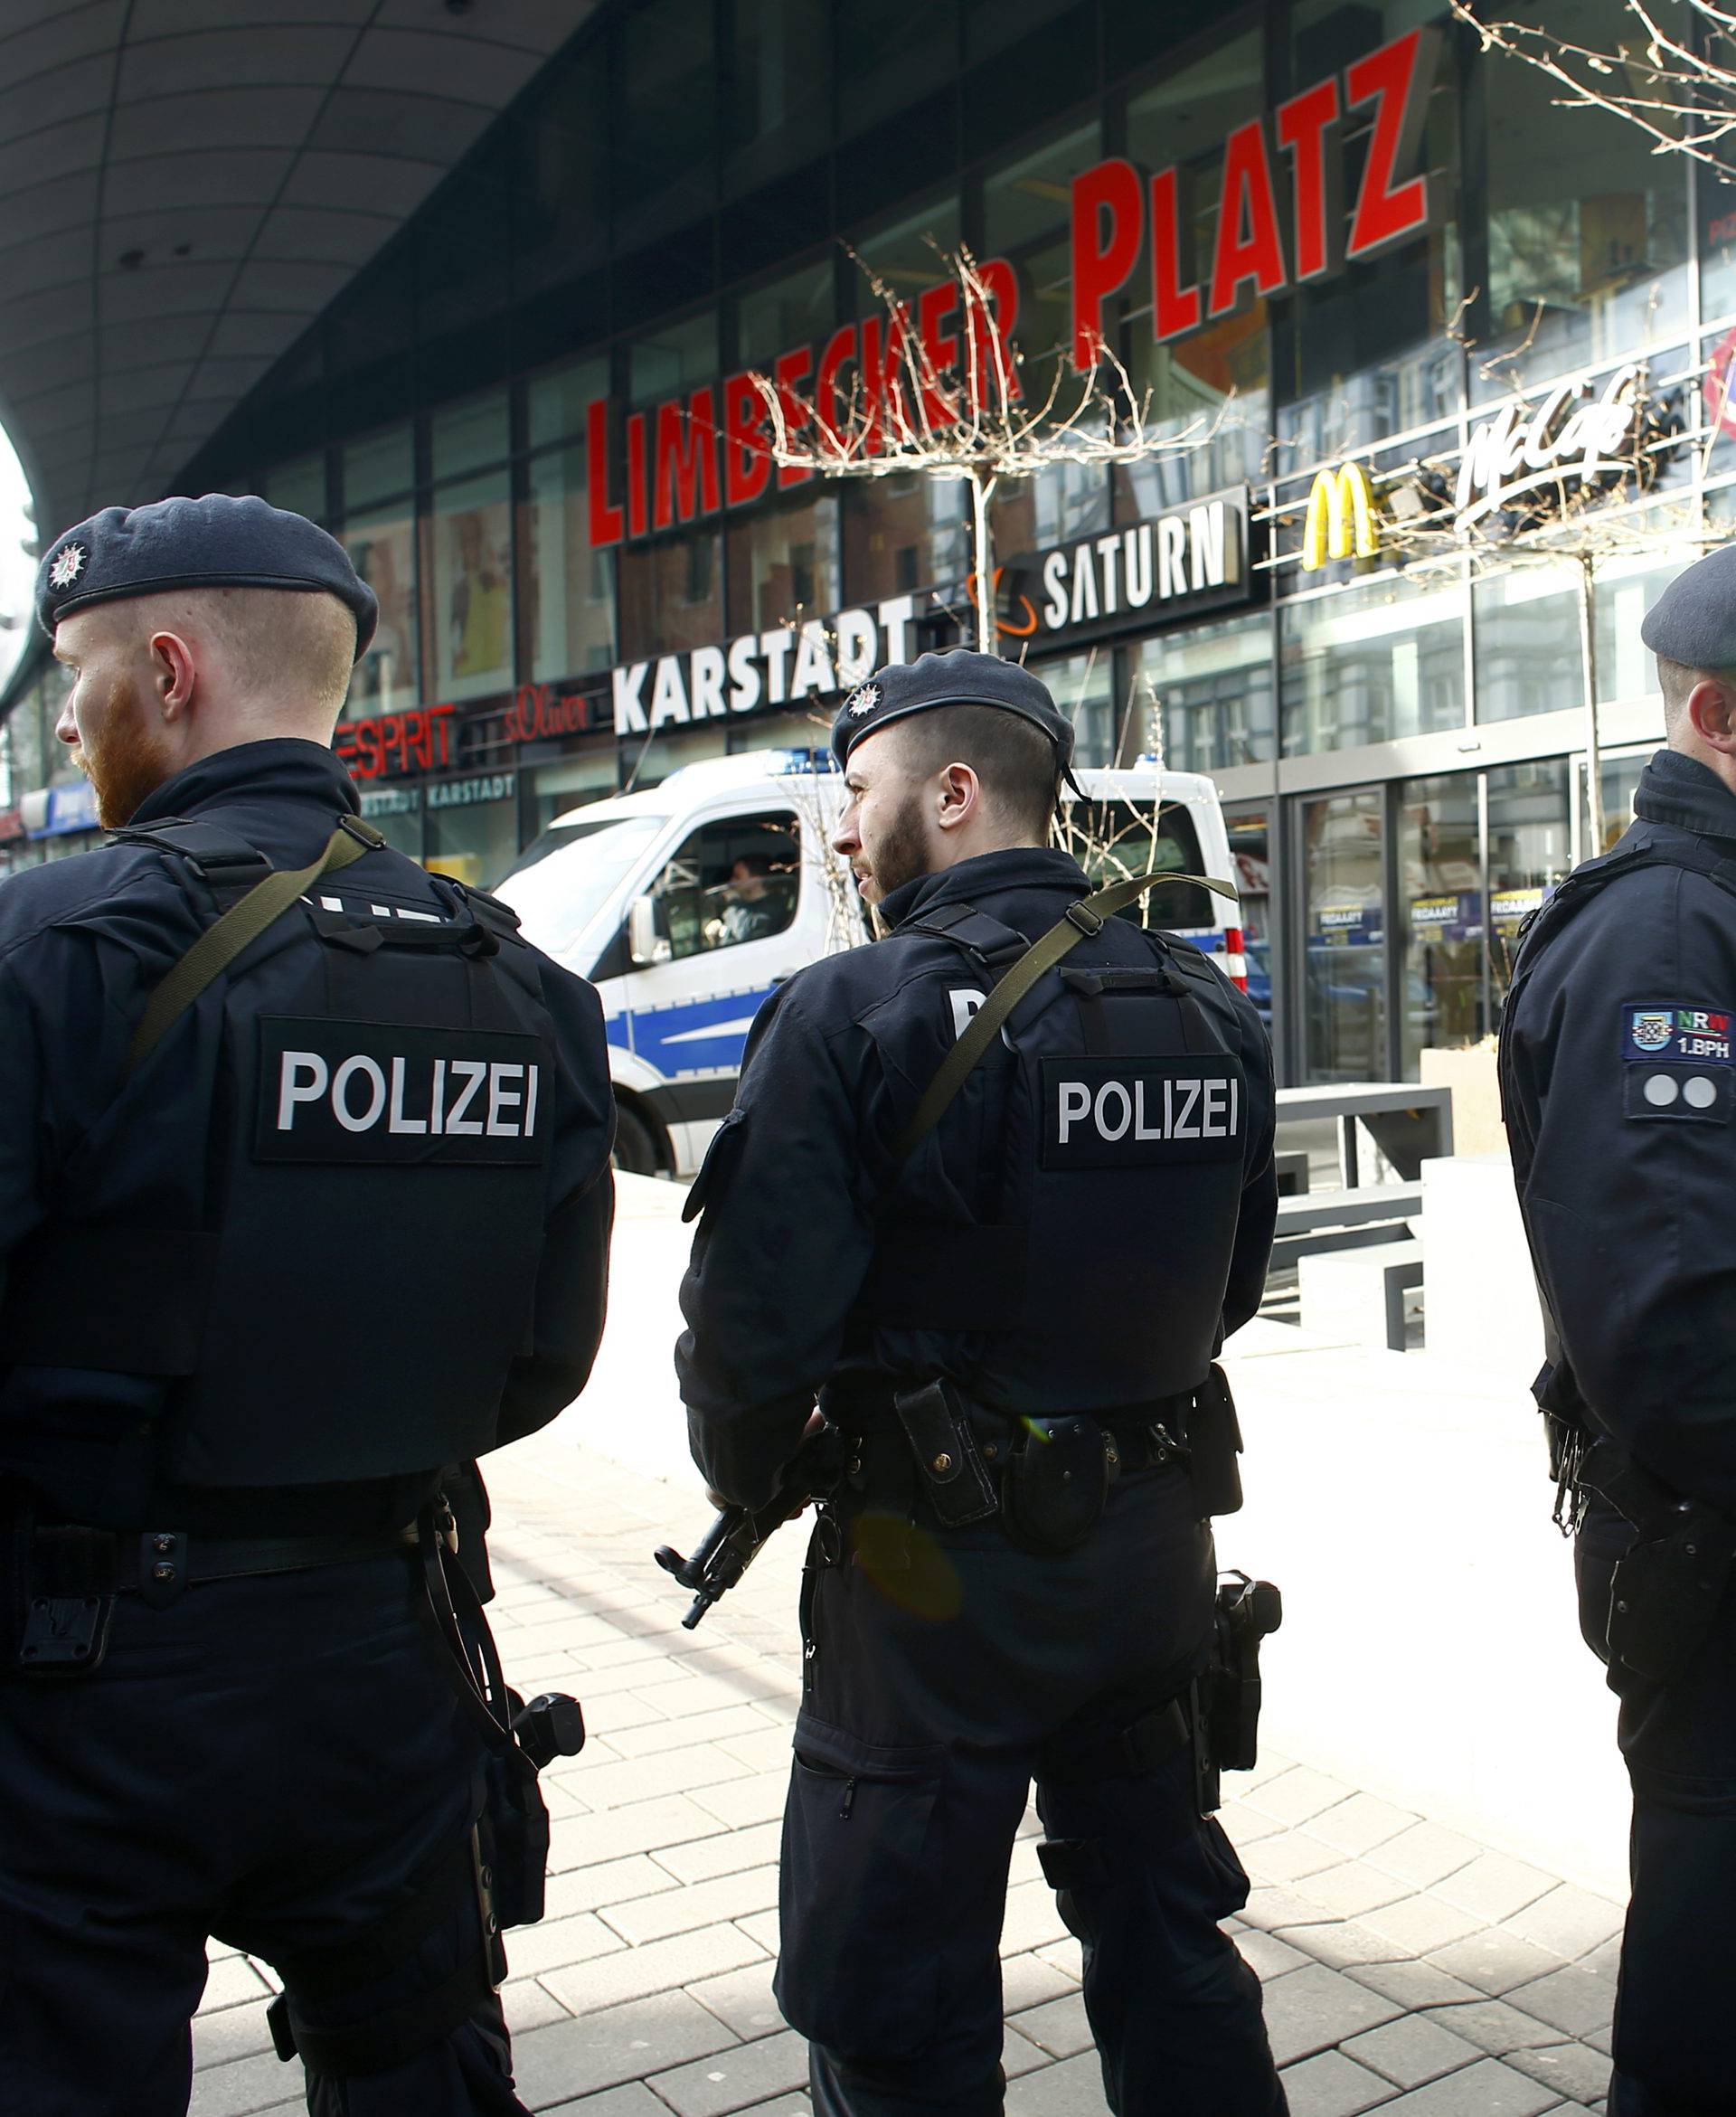 Police secures the area at Limbecker Platz shopping mall in Esse